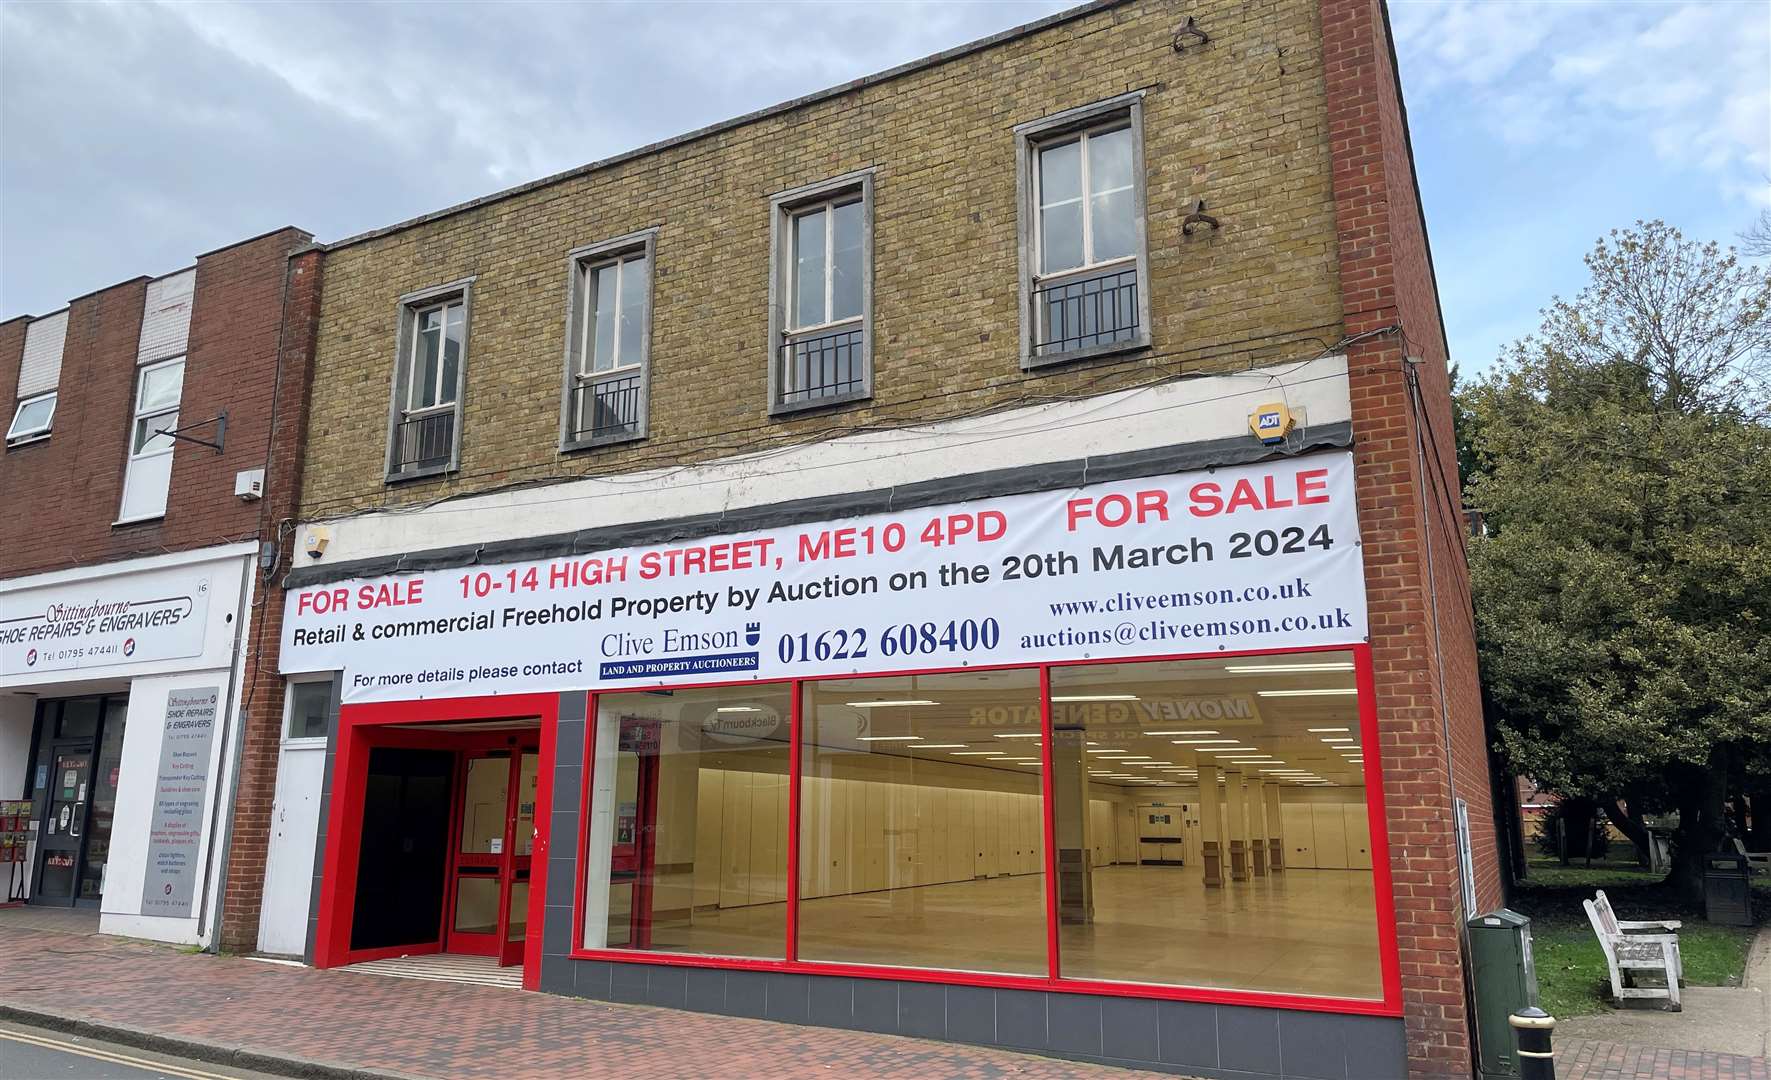 This property in Sittingbourne was previously let to Iceland on a long lease, but is now to be sold with vacant possession and may be suitable for a variety of schemes.